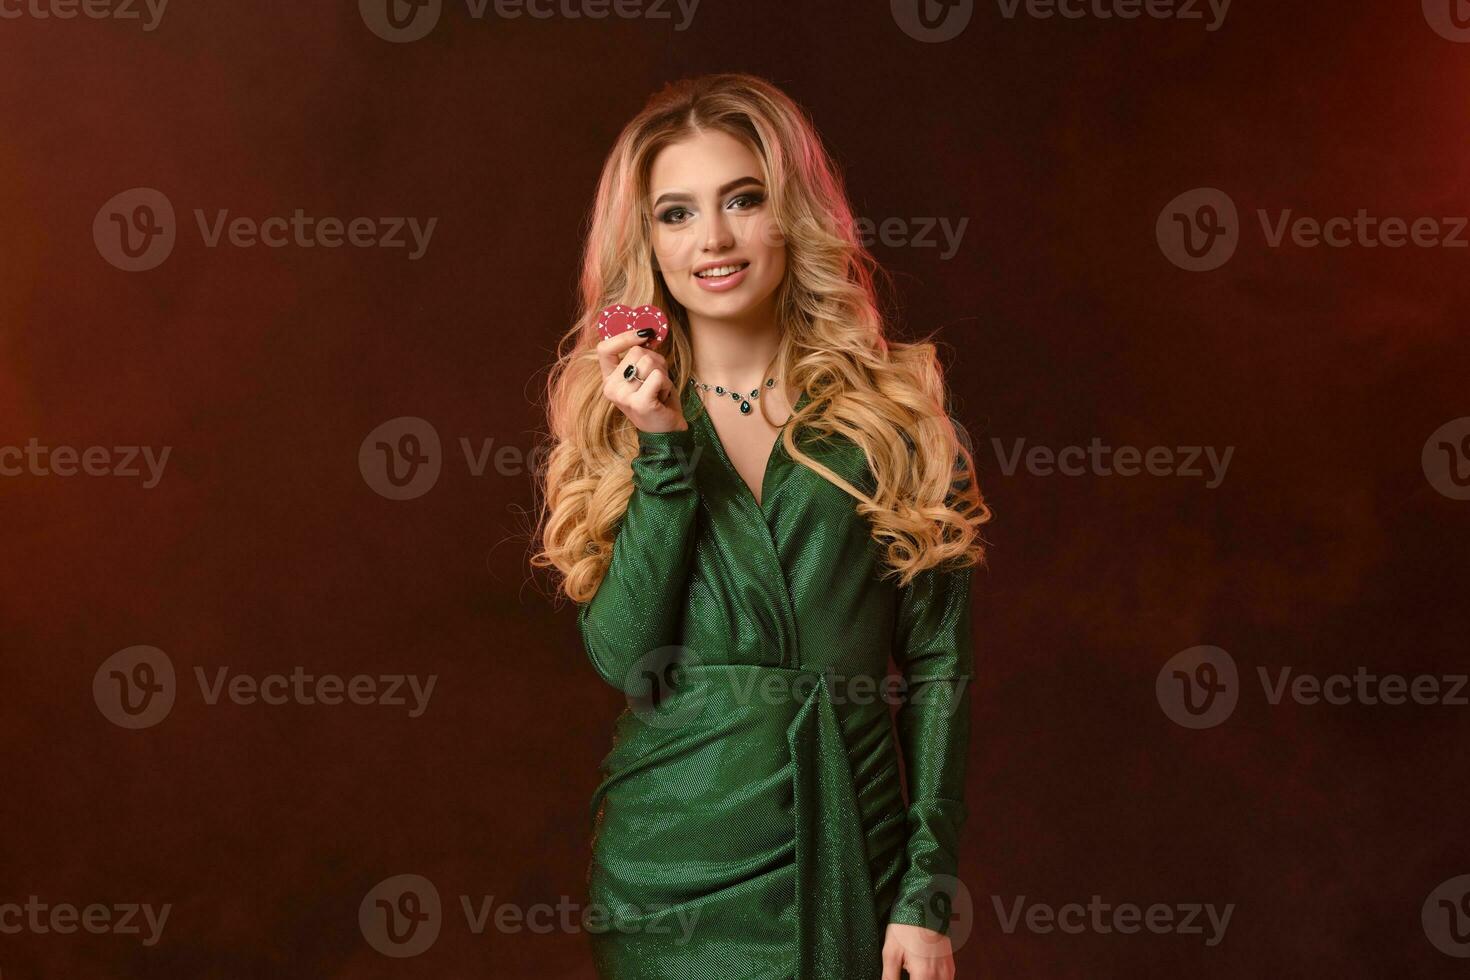 Blonde curly model, bright make-up, in green stylish dress and jewelry. Smiling, showing two red chips, posing on brown smoky background. Close-up photo